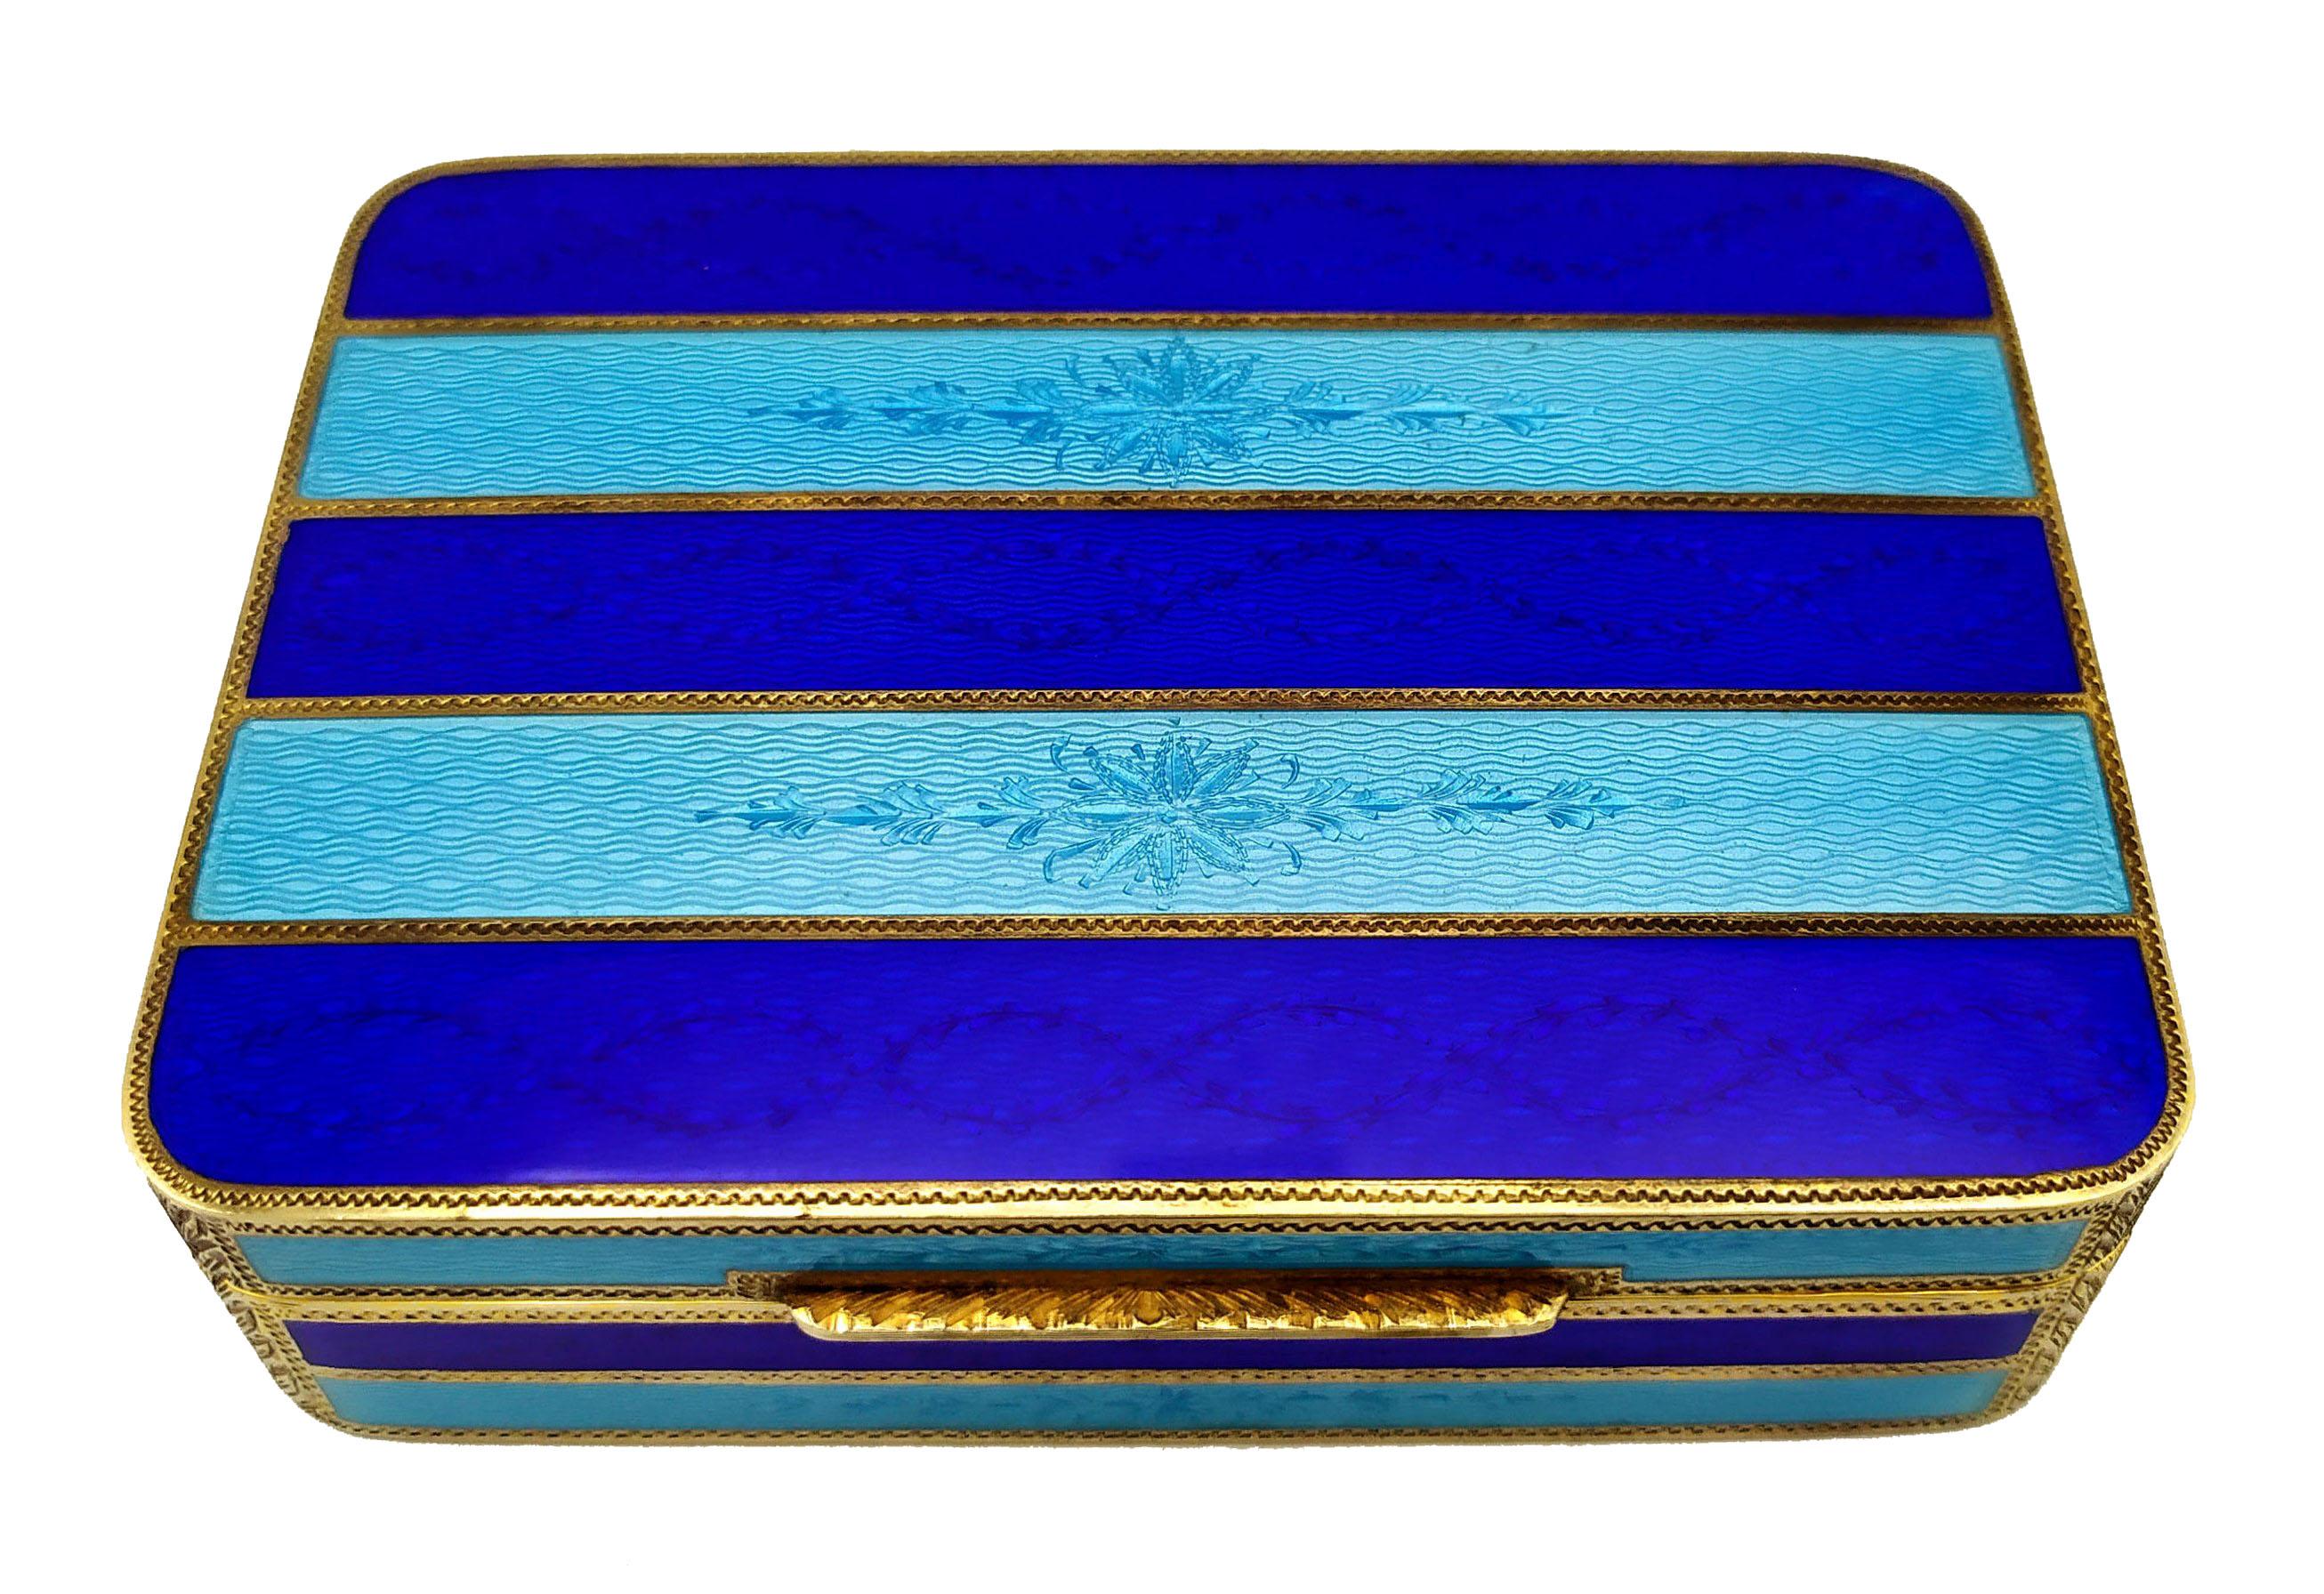 Rectangular table box with rounded corners in 925/1000 sterling silver gold plated with two-tone translucent fired enamels with guillochè stripes and hand-engraved motifs. George V English Empire style. Dimensions cm. 8.3 x 11.3 x 3. Weight gr. 349.